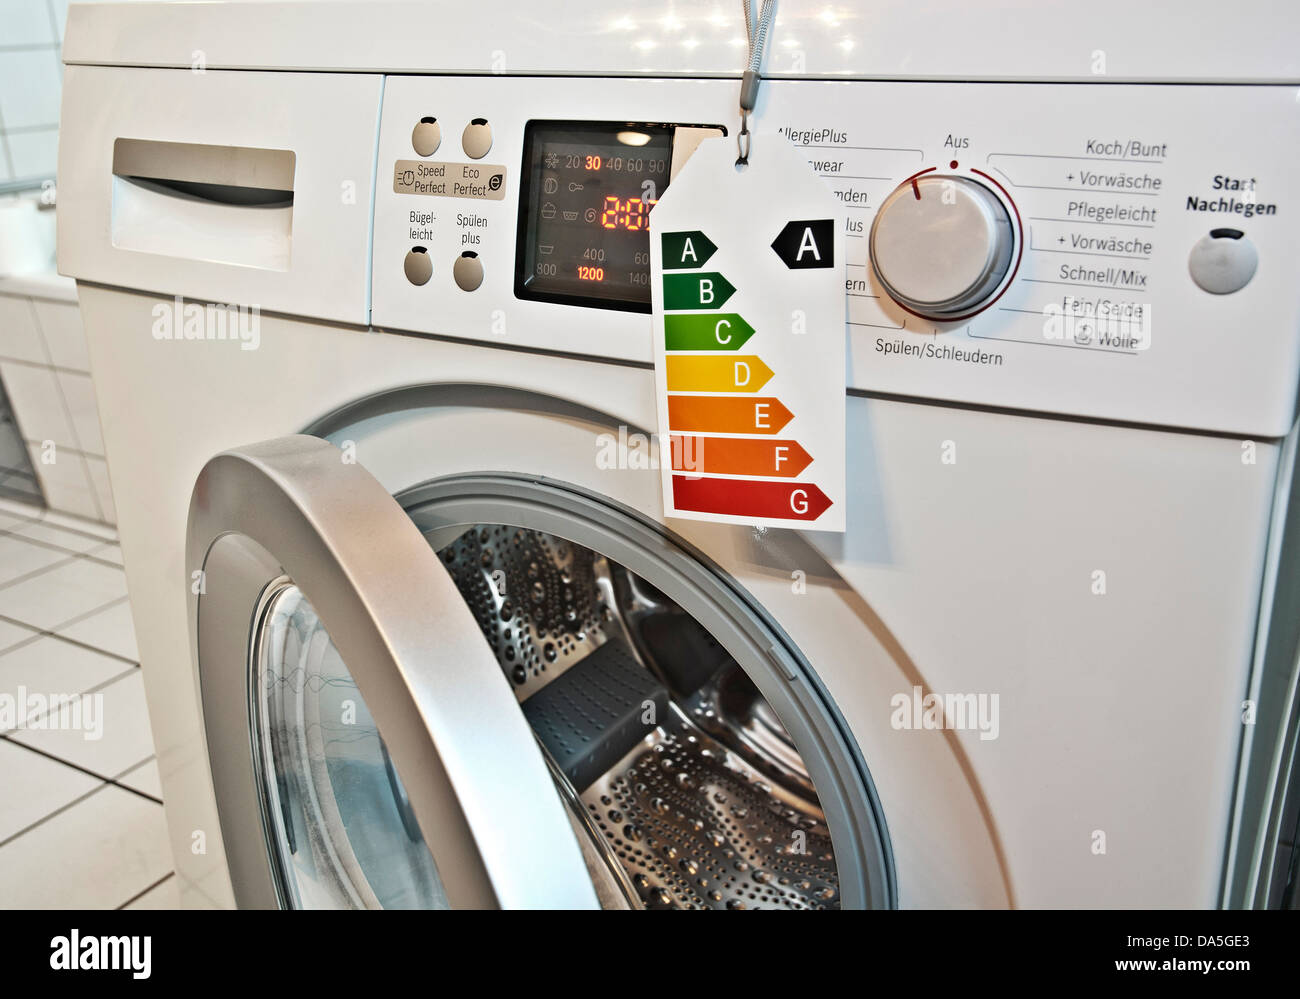 Modern washing machine with energy efficiency label. Stock Photo